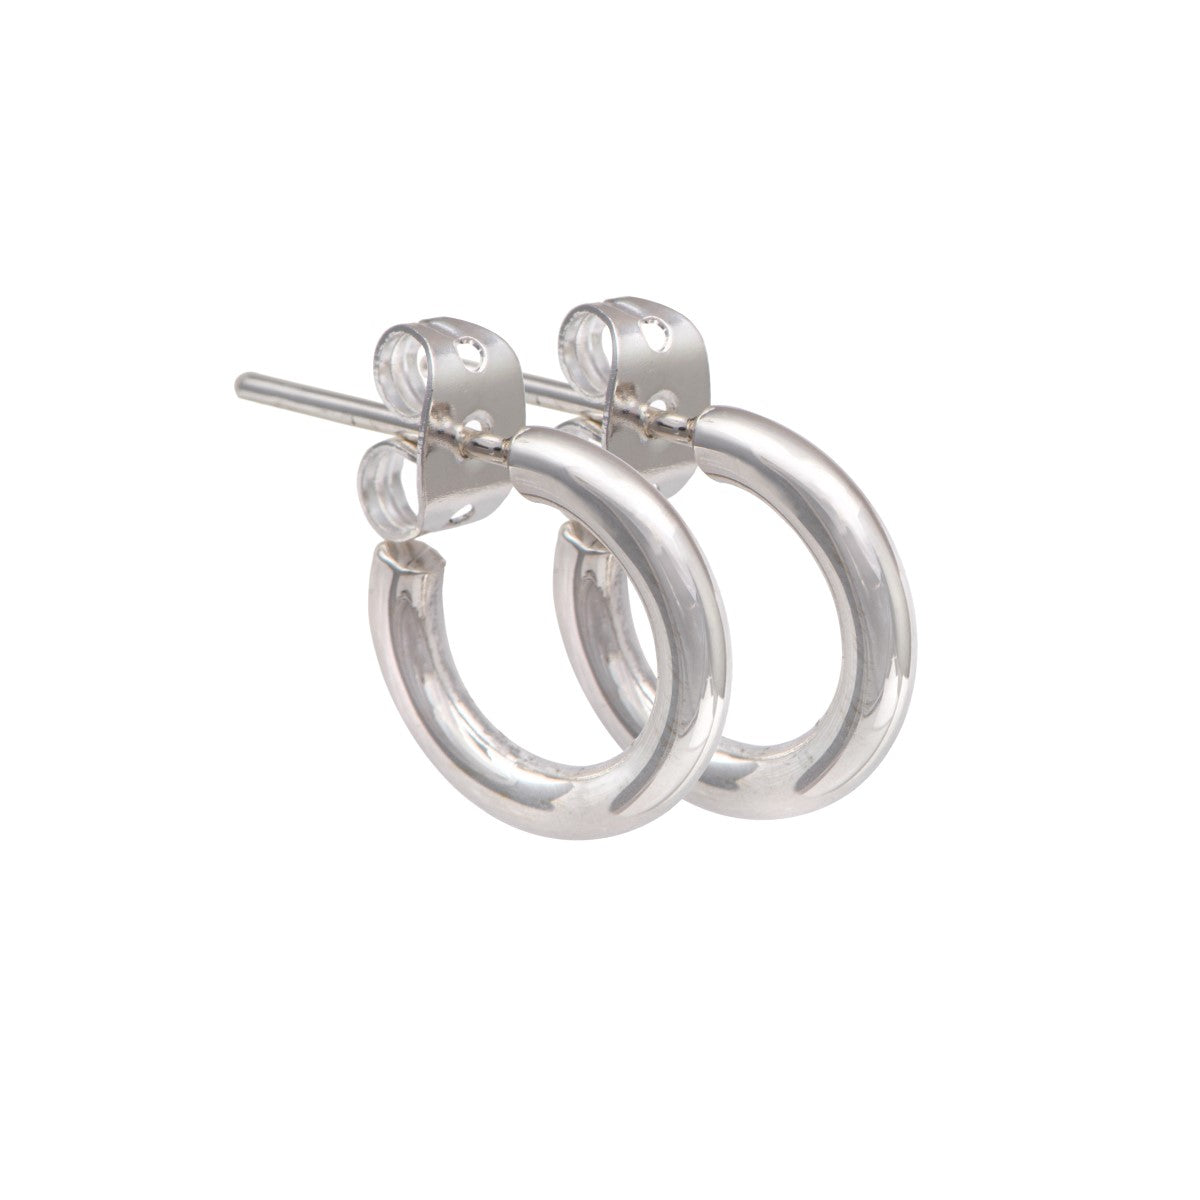 Small Sterling Silver Hoop Earrings with a Rounded Edge